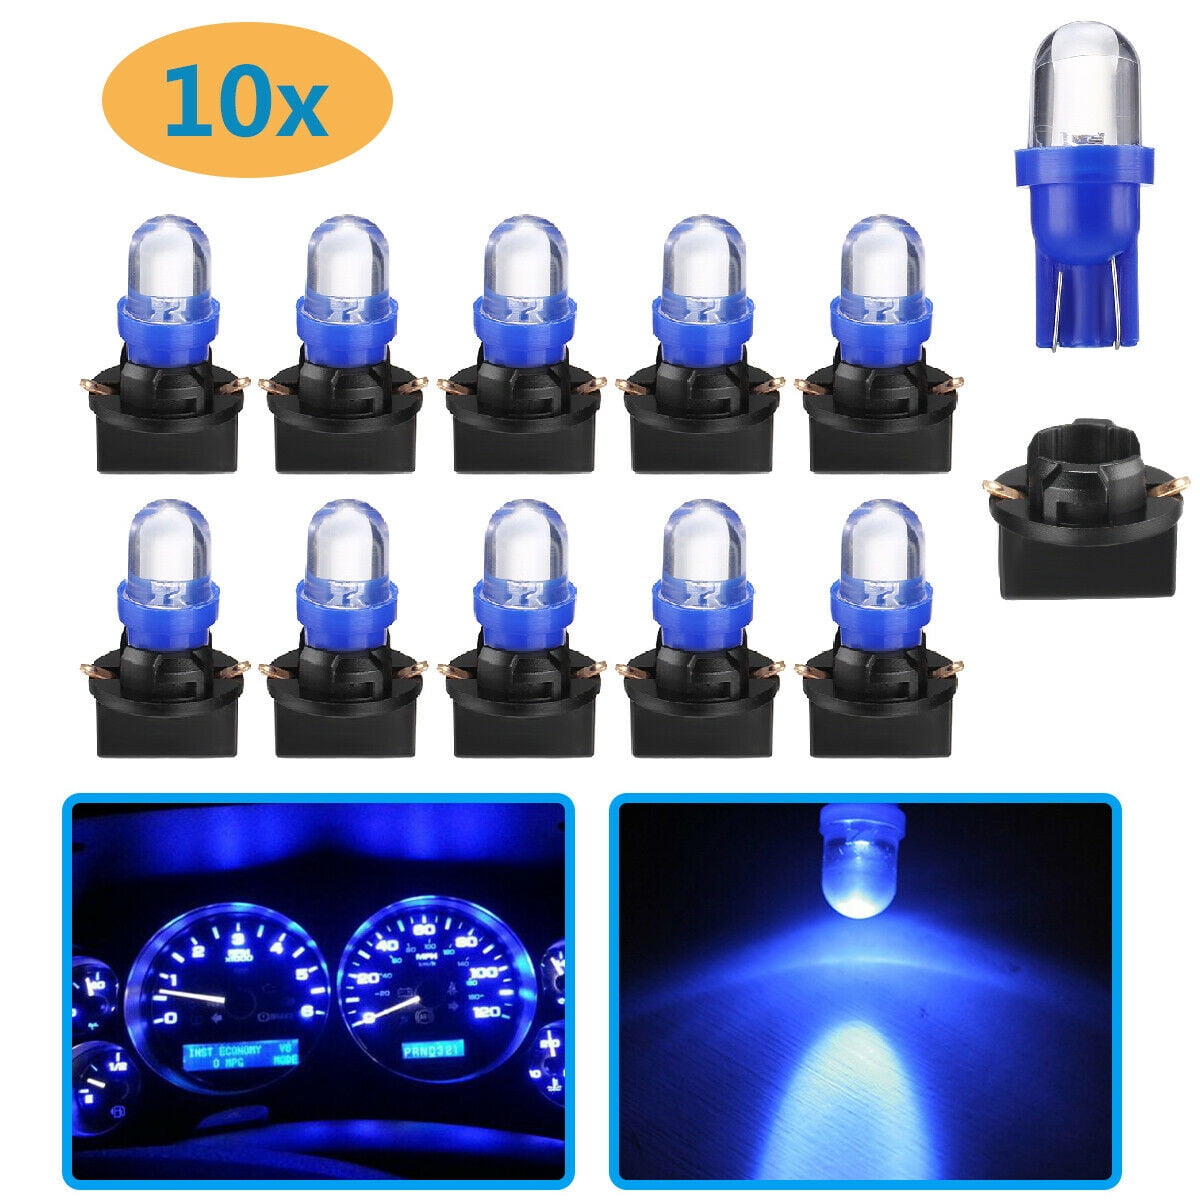 10x White 194 T10 W5W LED Gauge instrument Panel Speed Dashboard Light Bulbs A